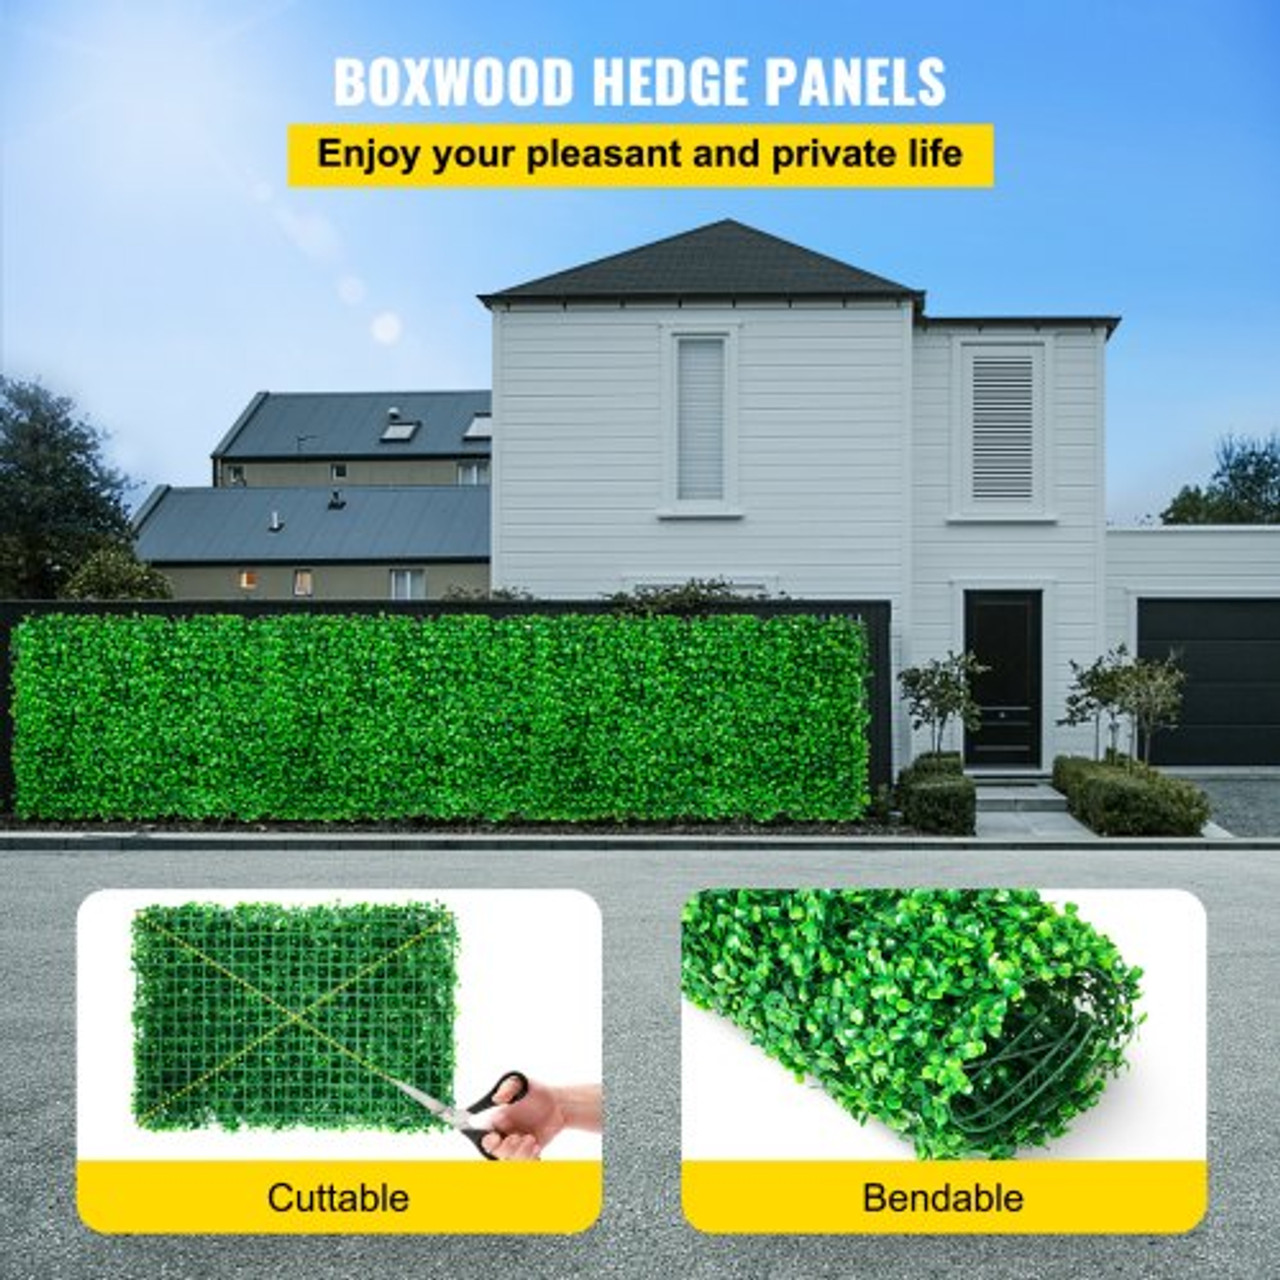 Artificial Boxwood Panel 8pcs Boxwood Hedge Wall Panels Artificial Grass Backdrop Wall 24X16 4cm Green Grass Wall, Fake Hedge for Decor Privacy Fence Indoor Outdoor Garden Backyard